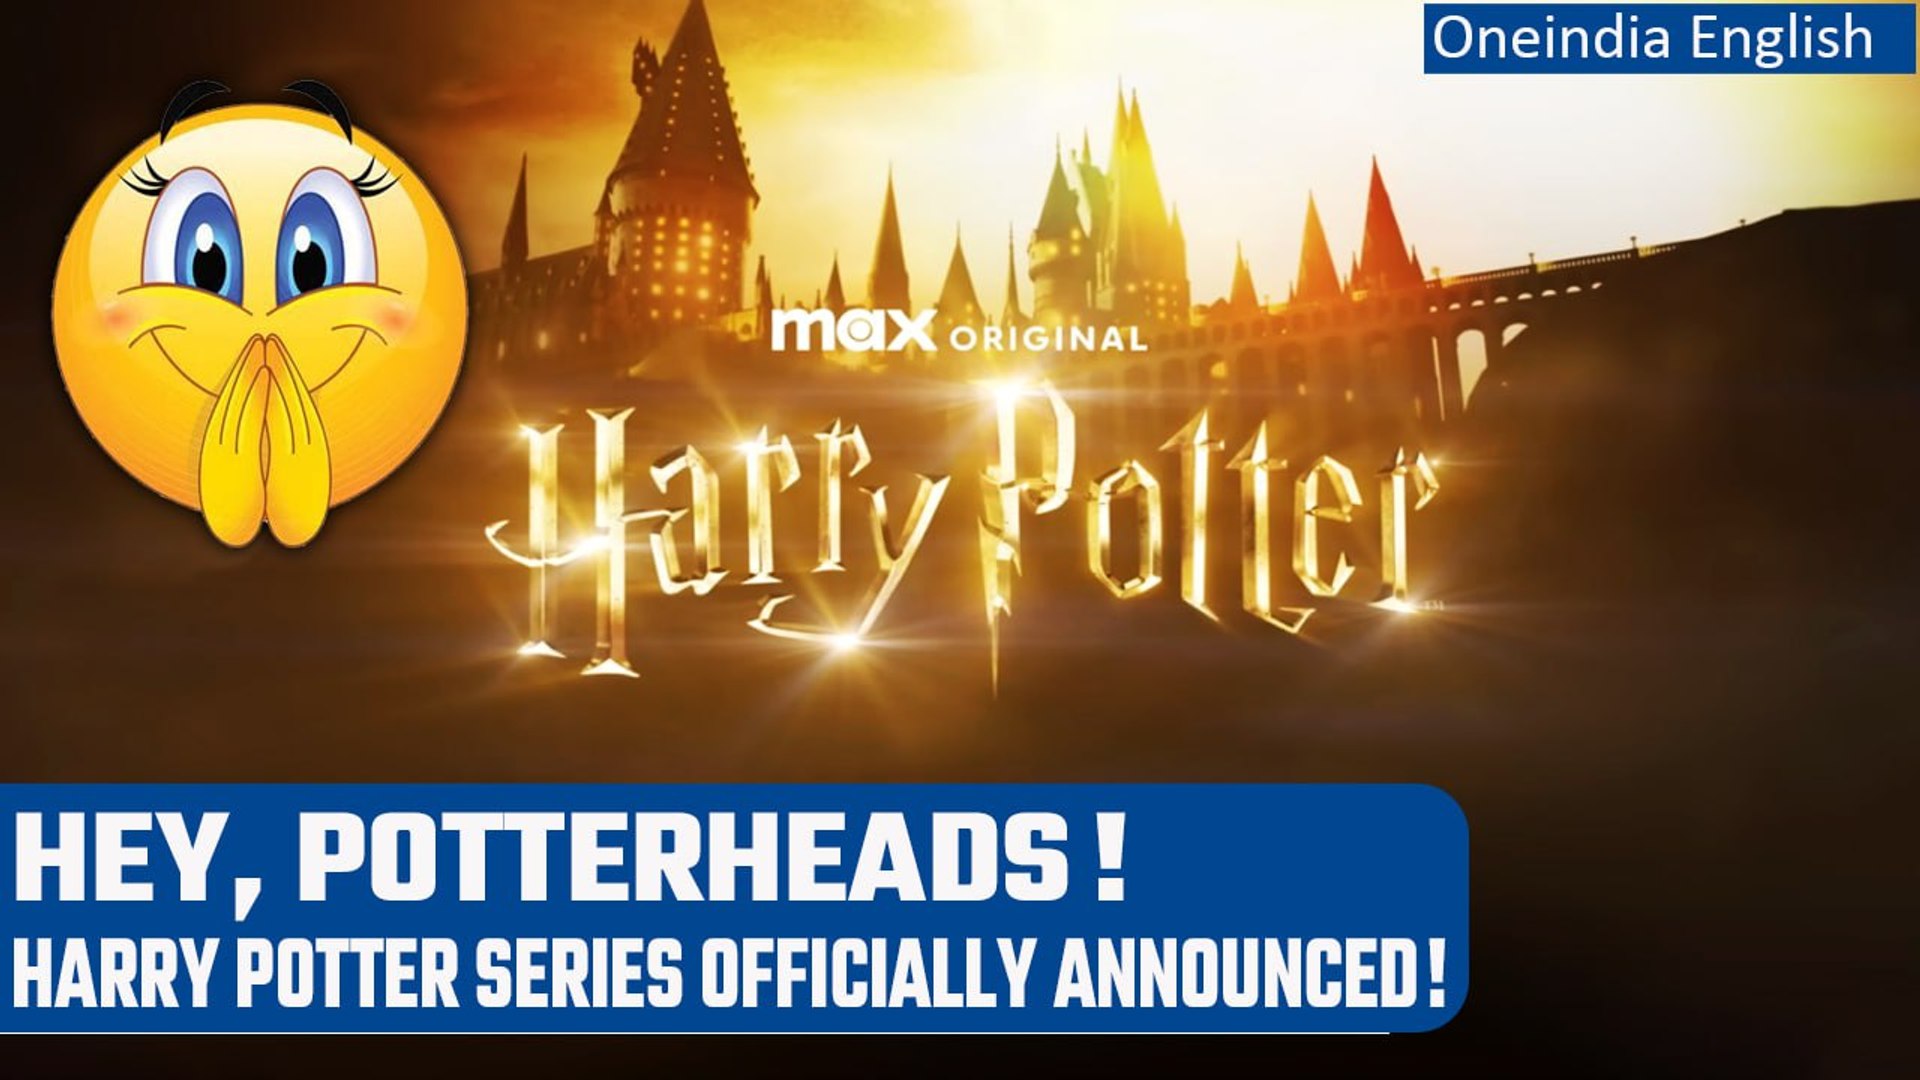 Harry Potter Max Original Series Announced With New Teaser